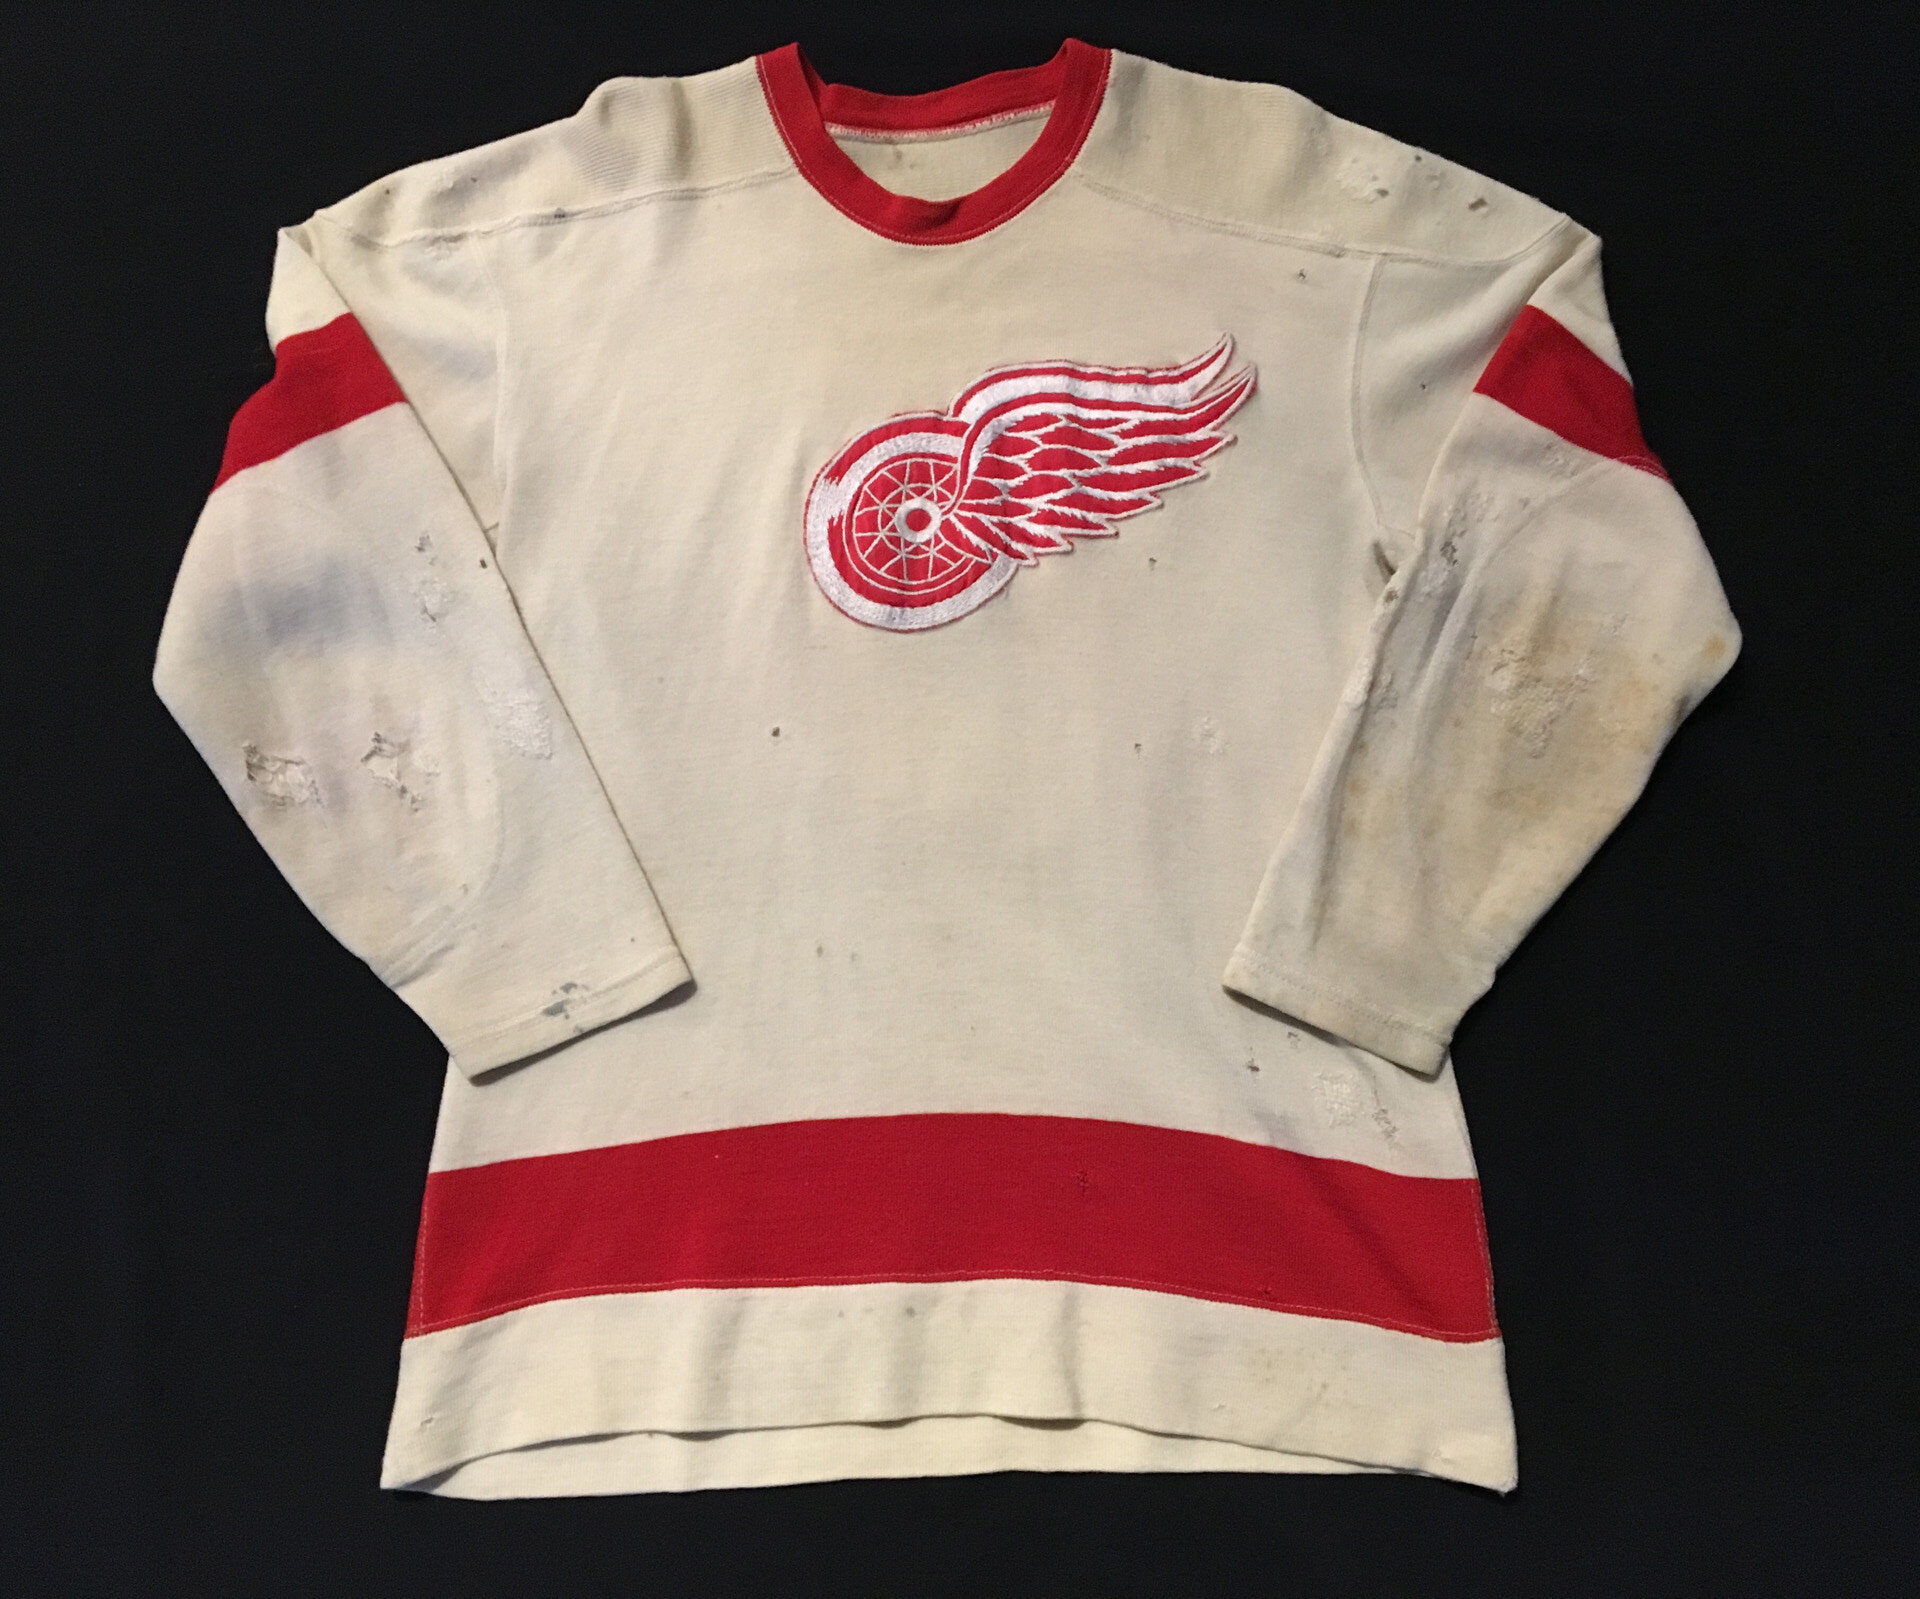 Detroit Red Wings retro jersey now available  Where to buy the throwback  styles 